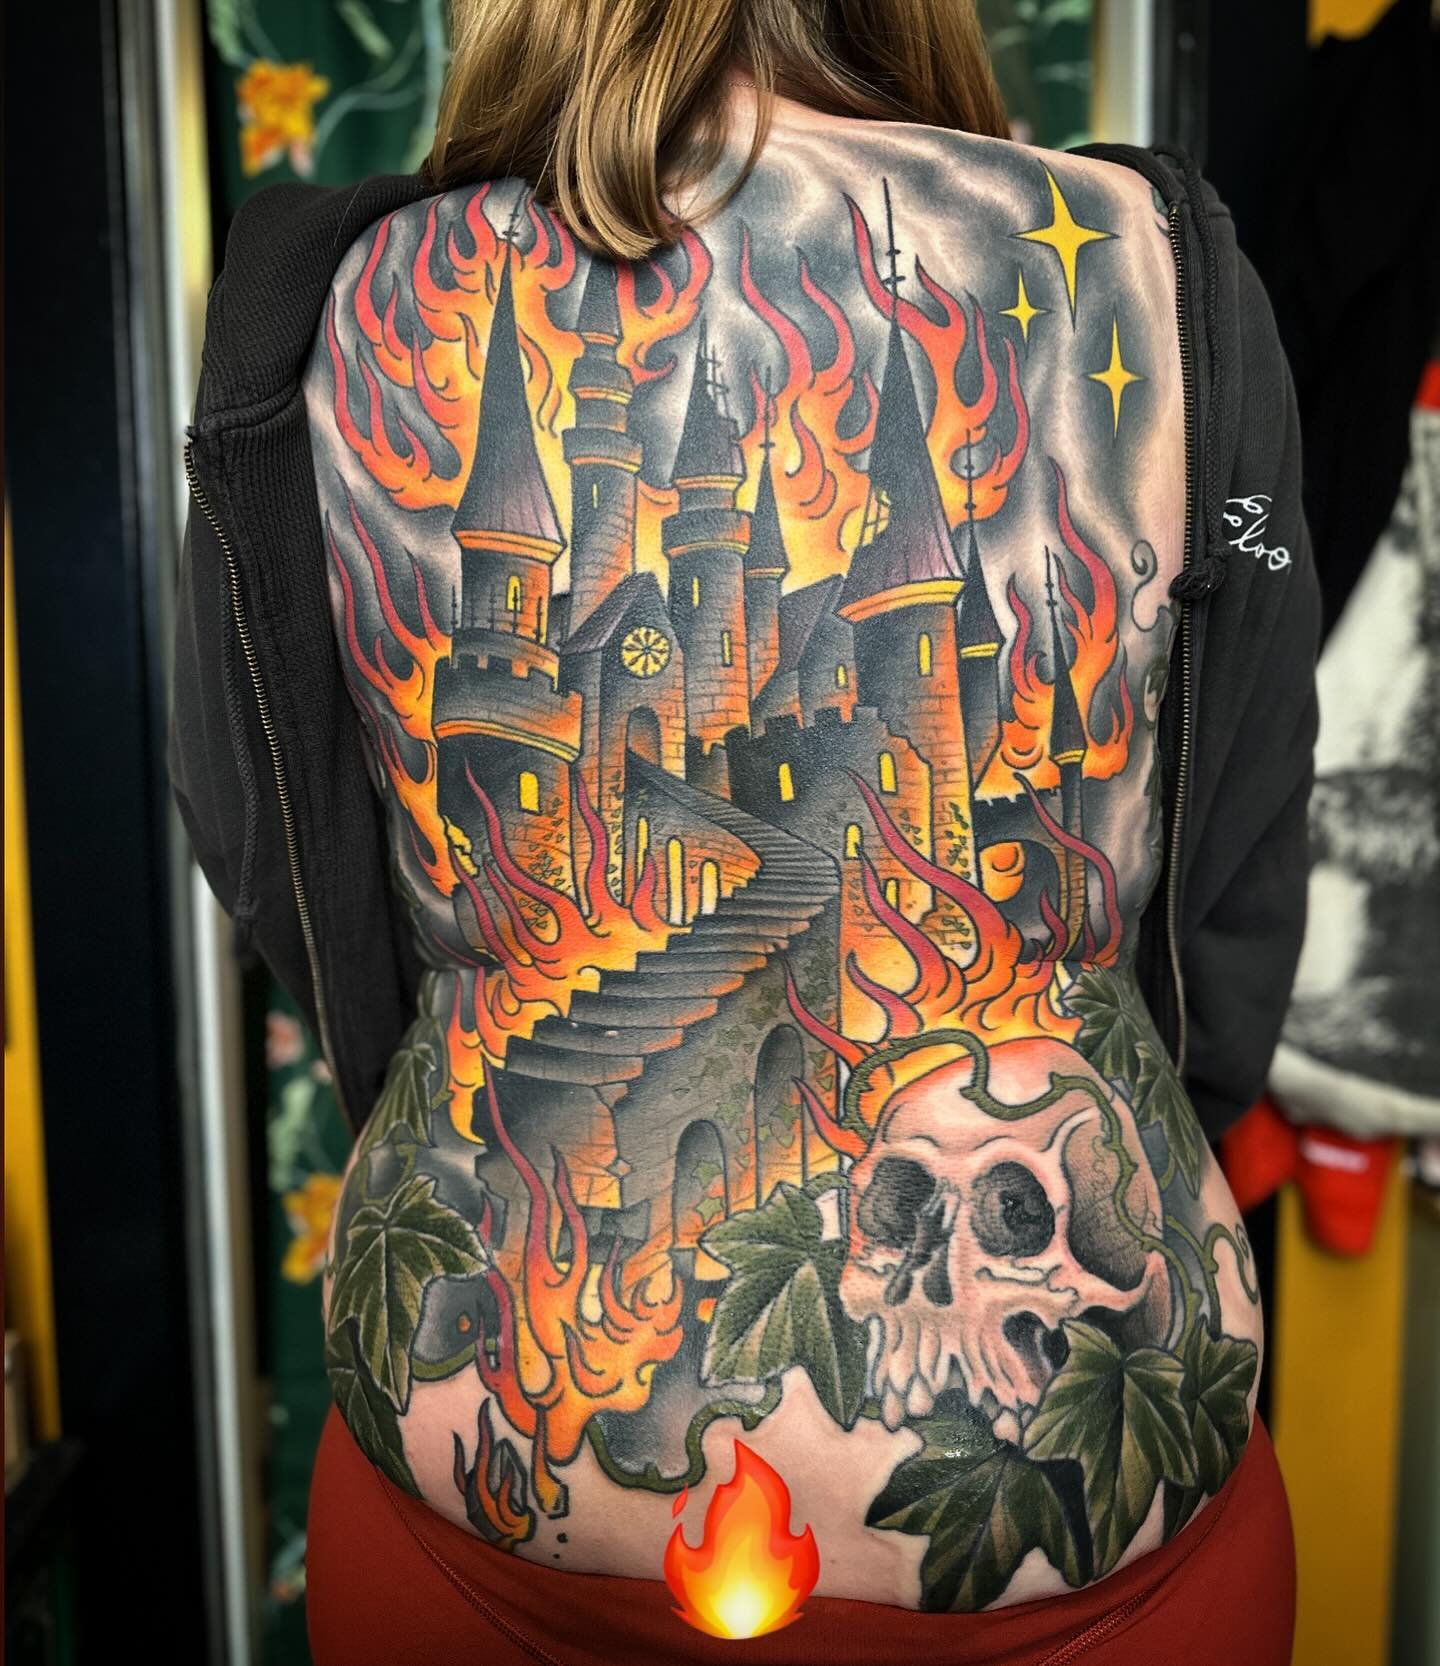 Marisa's dark fantasy backpiece is all done! Thank you so much, Marisa! For anyone considering getting a backpiece from me, we started Marisa's almost exactly a year ago and that is a pretty typical amount of time for a project like this to take (if 